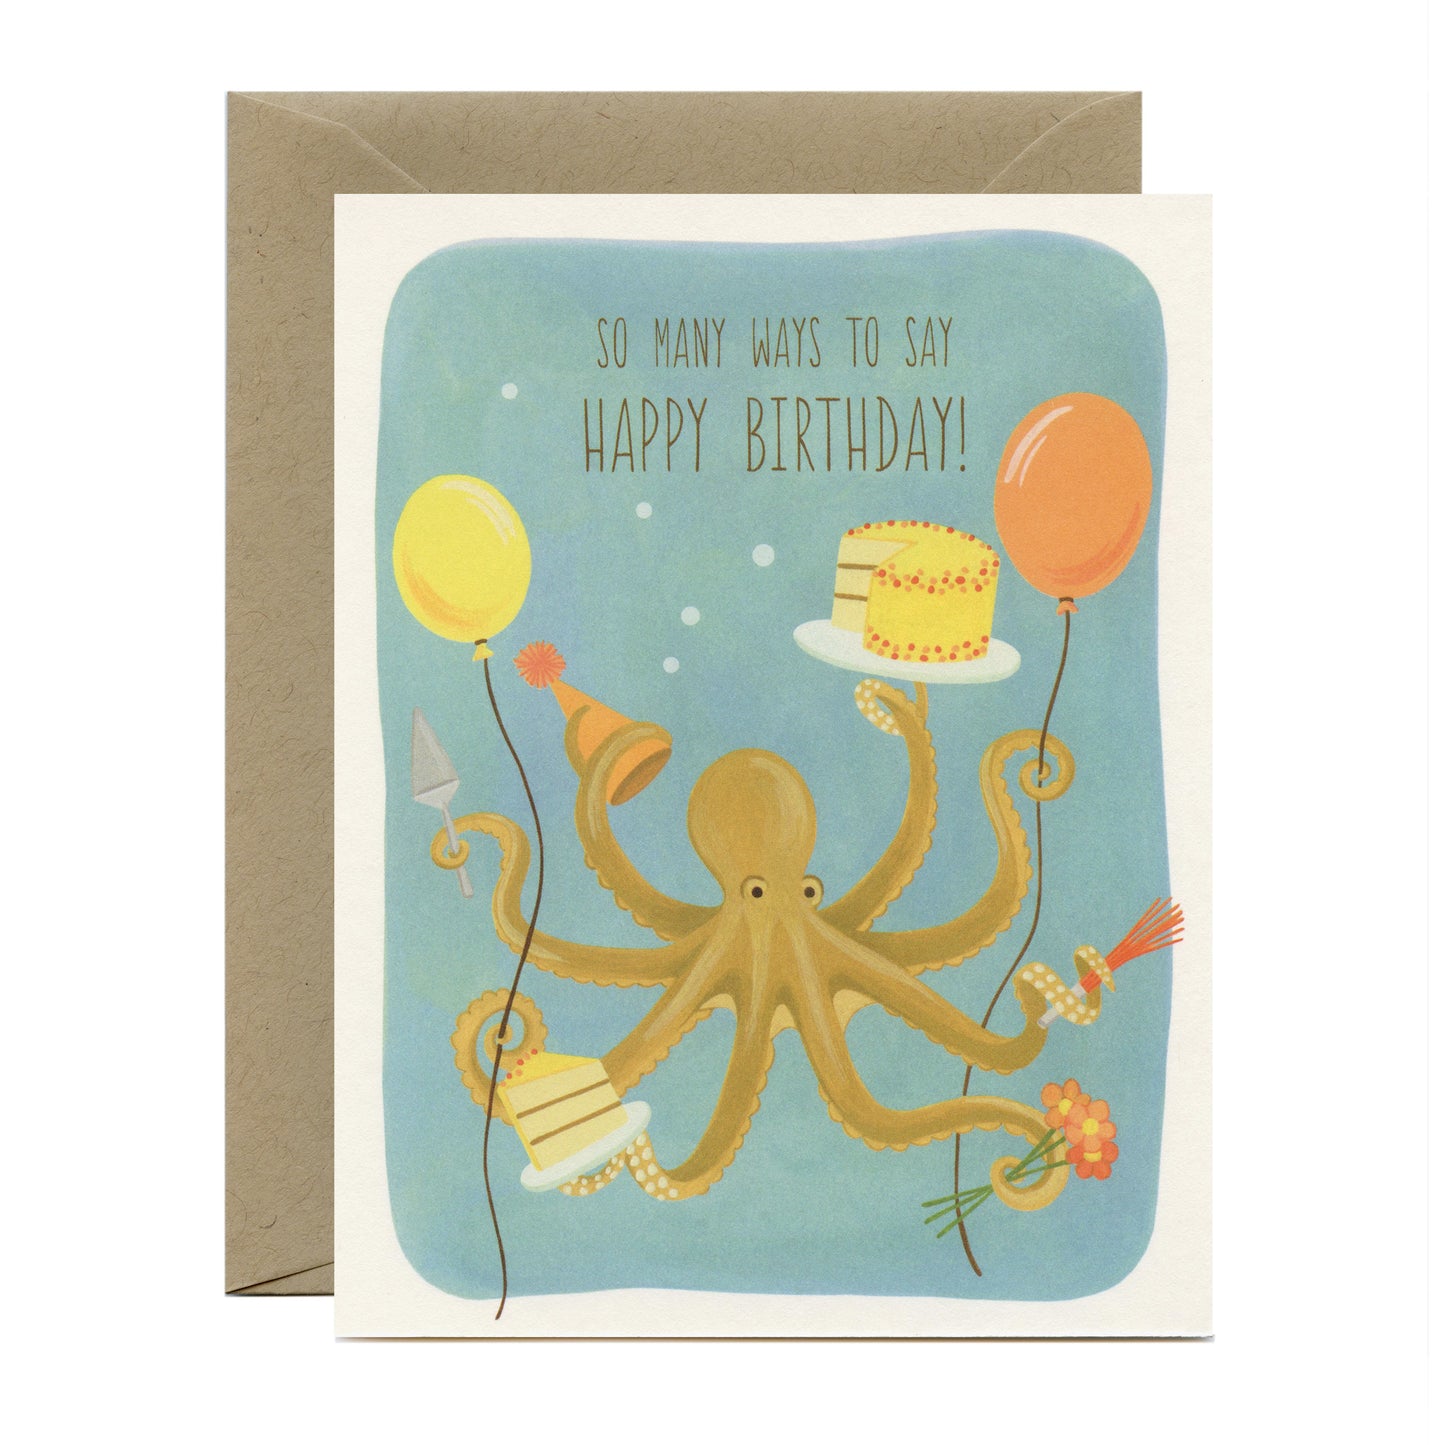 OCTOPUS, CAKE AND BALLOONS - BIRTHDAY GREETING CARD